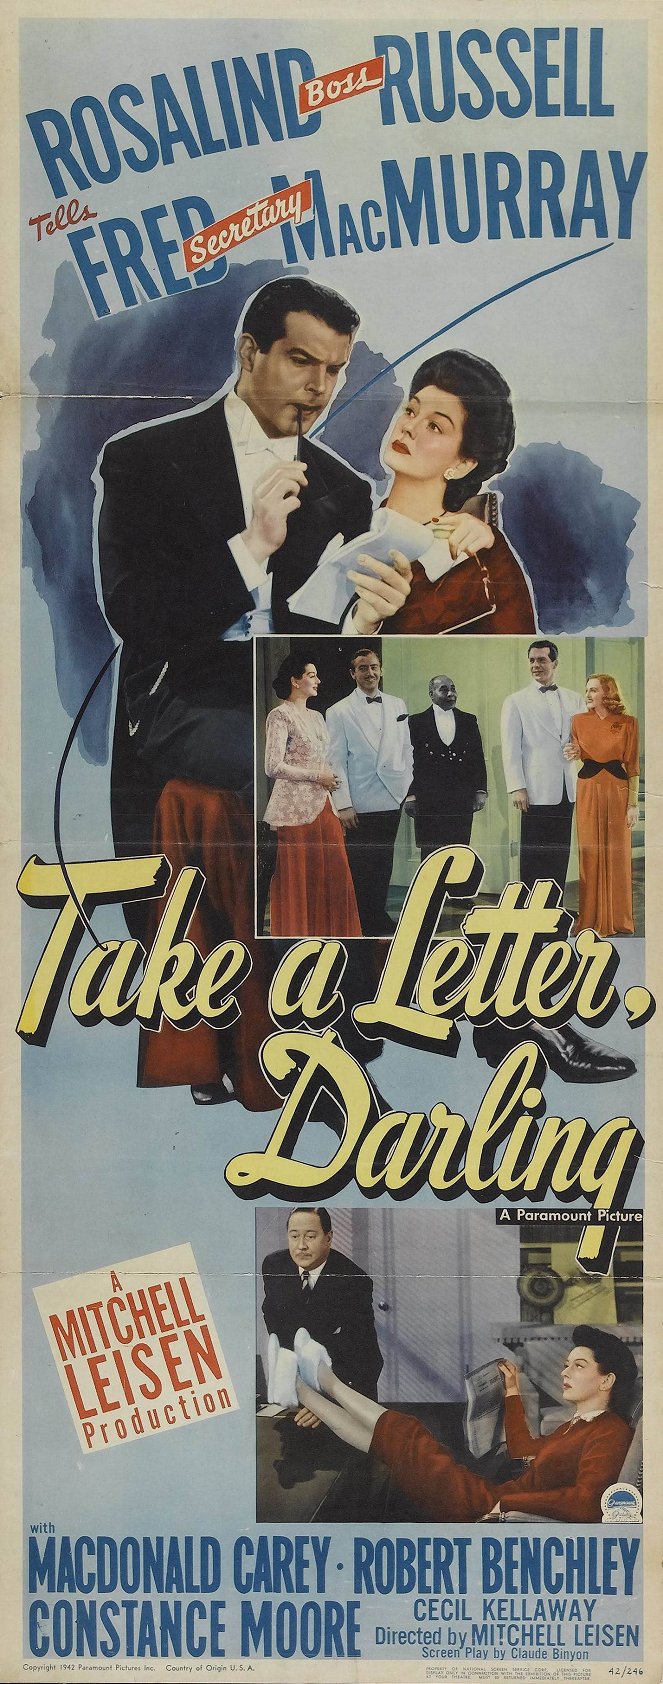 Take a Letter, Darling - Affiches